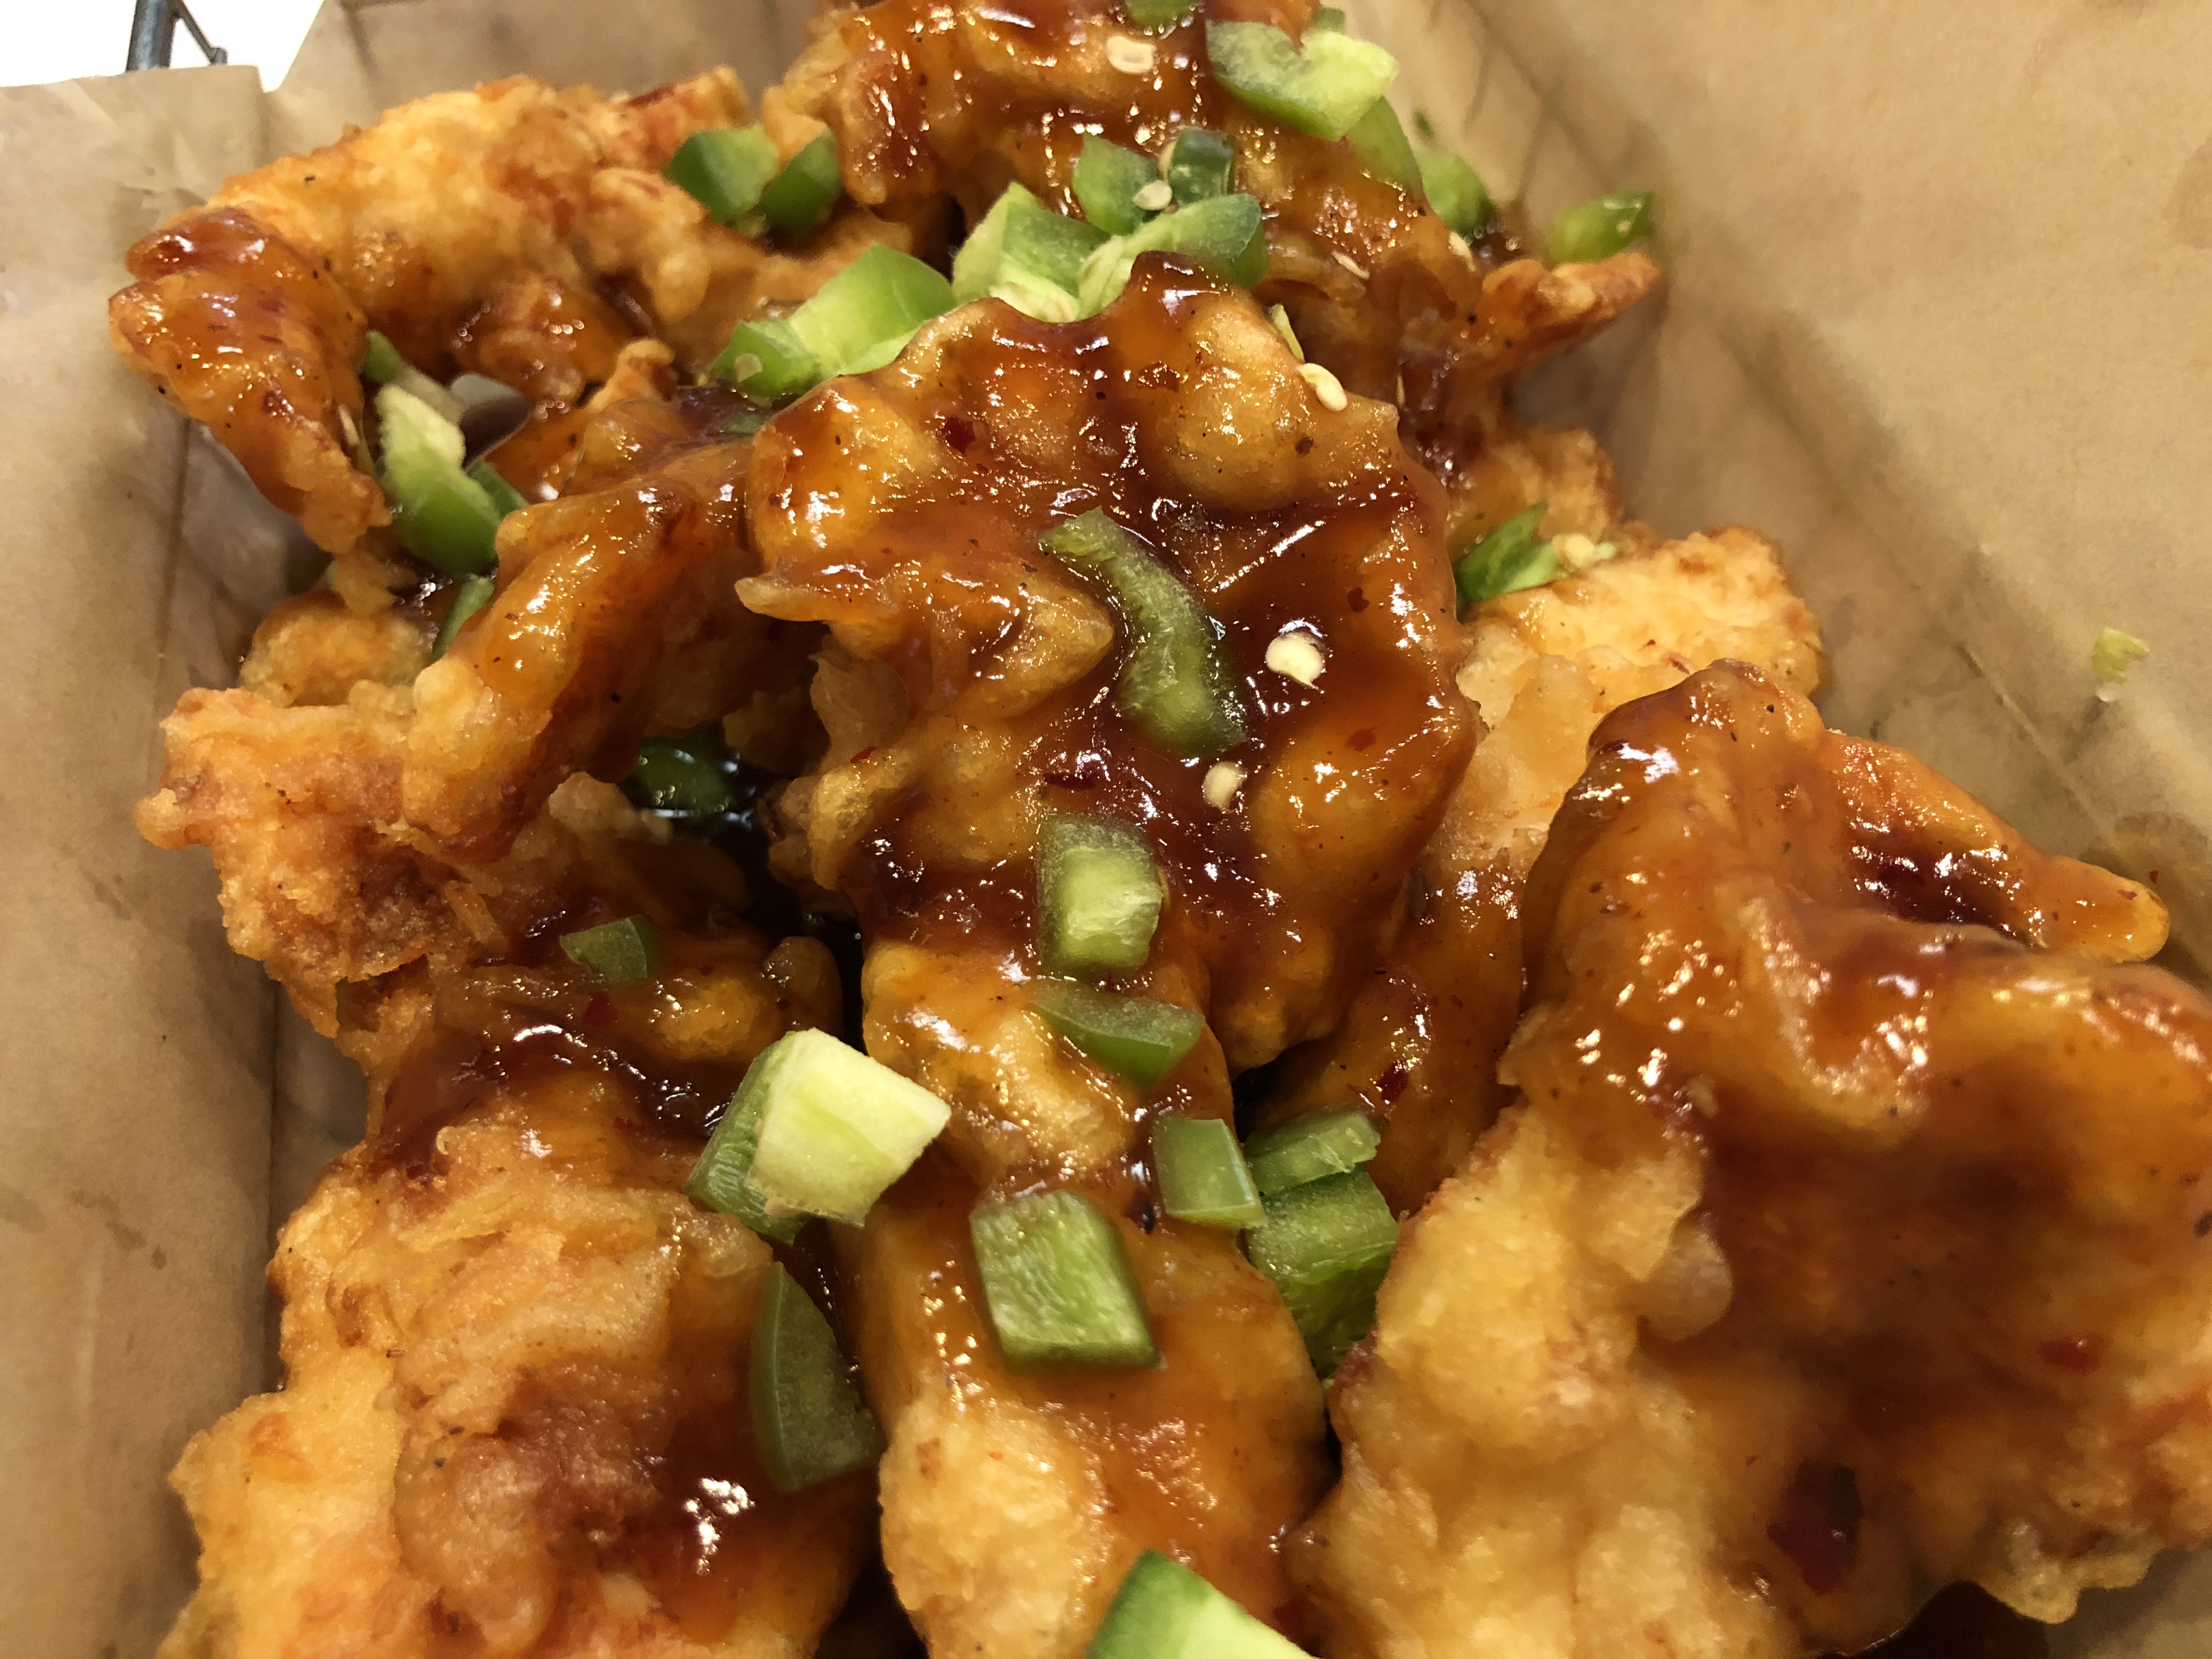 ChanChan Chicken Tenders - Small - From Chan Chan Food House in Irvine